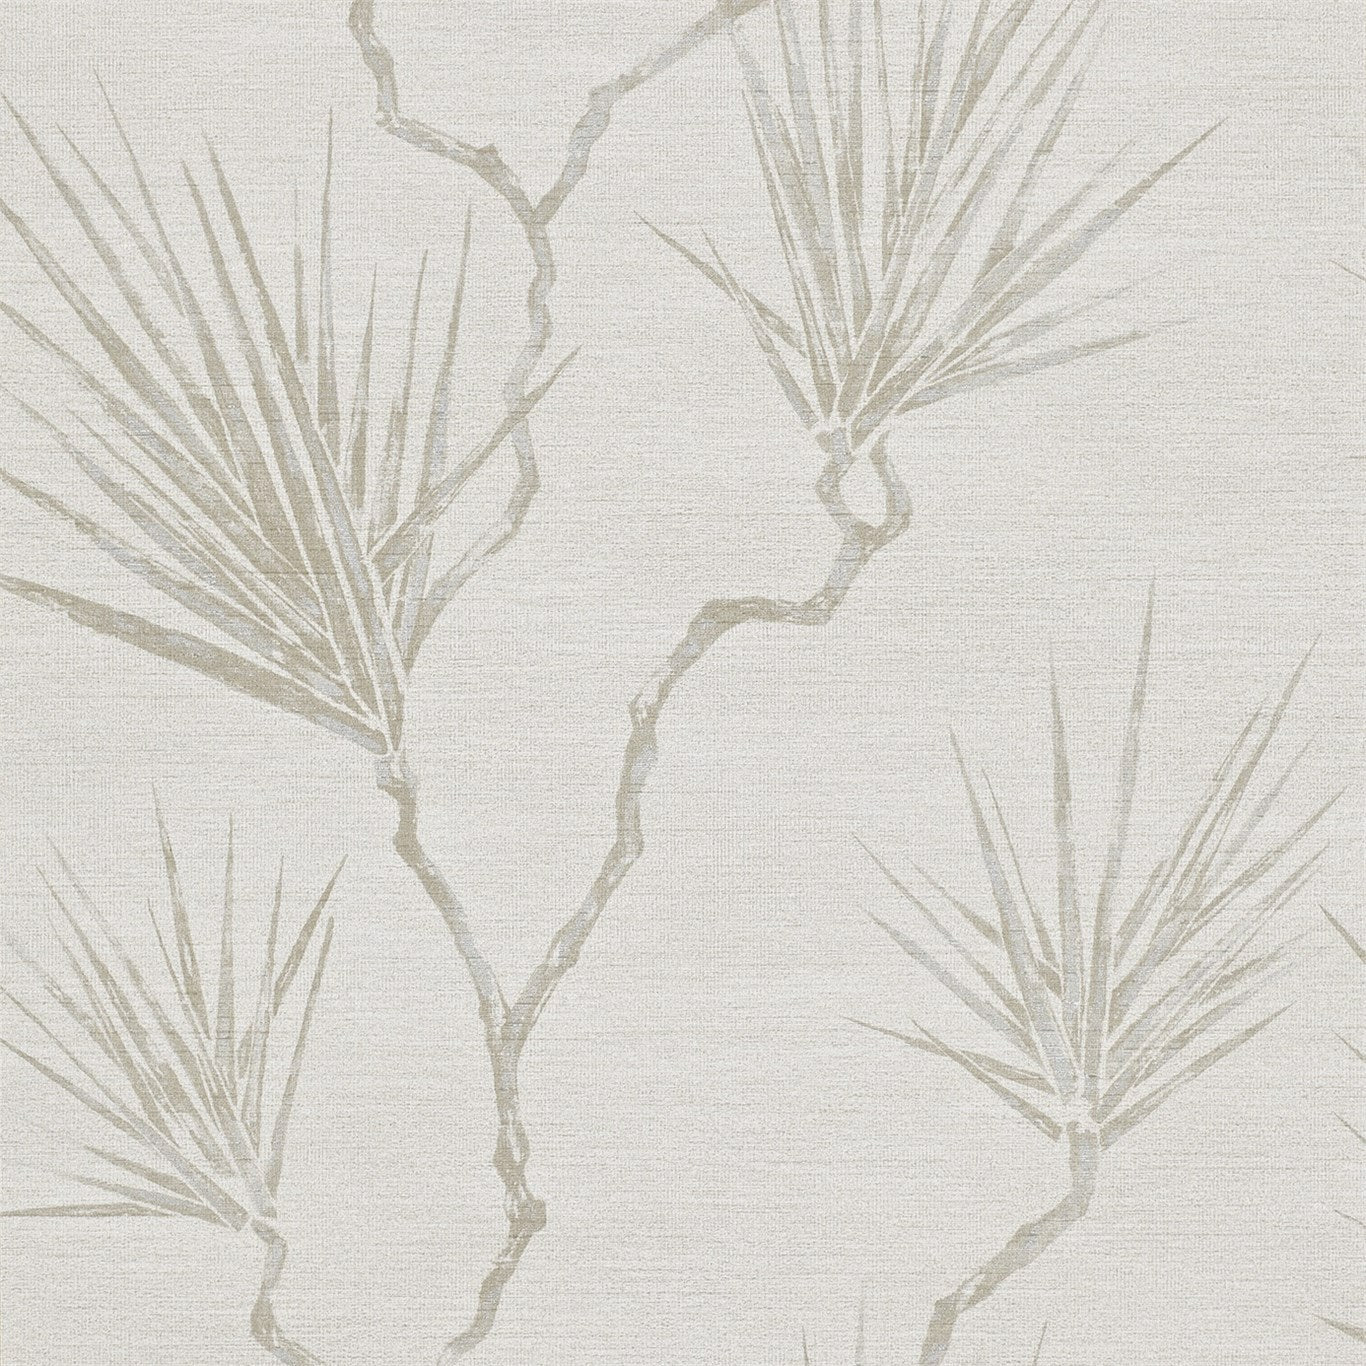 Peninsula Palm Parchment Wallpaper EREE110821 by Harlequin